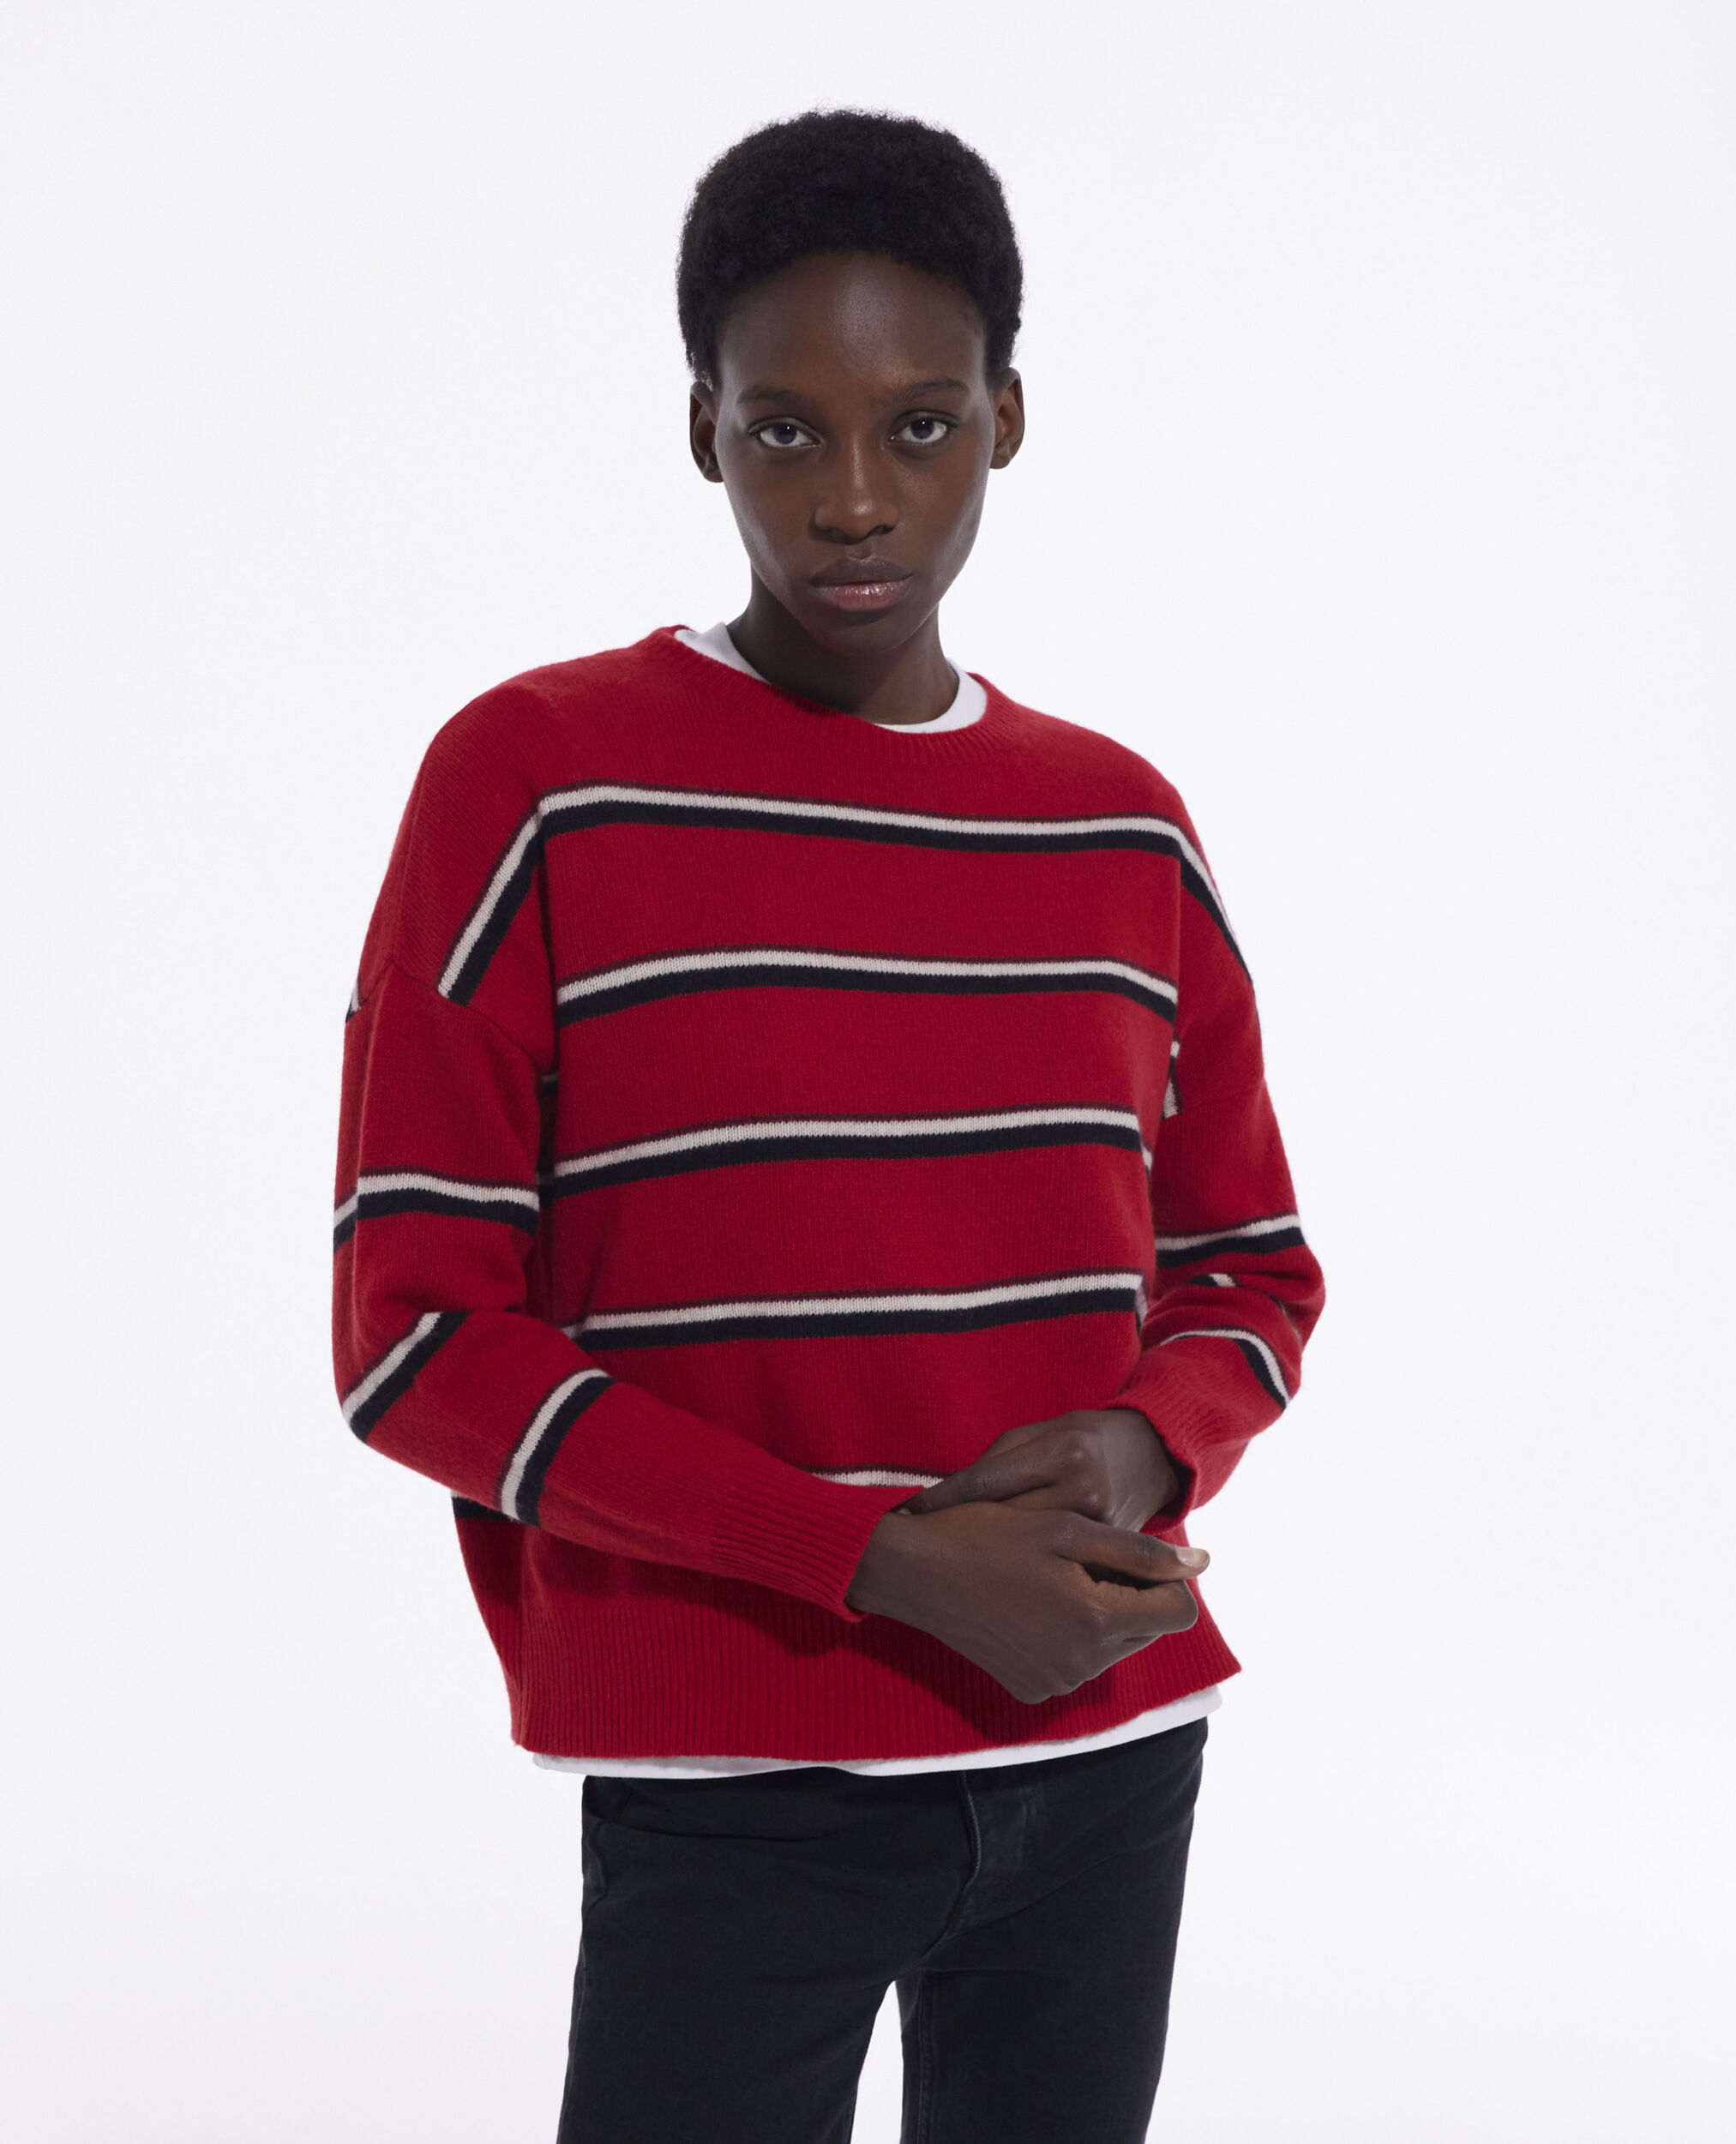 Red cashmere sweater, RED-BLACK-WHITE, hi-res image number null